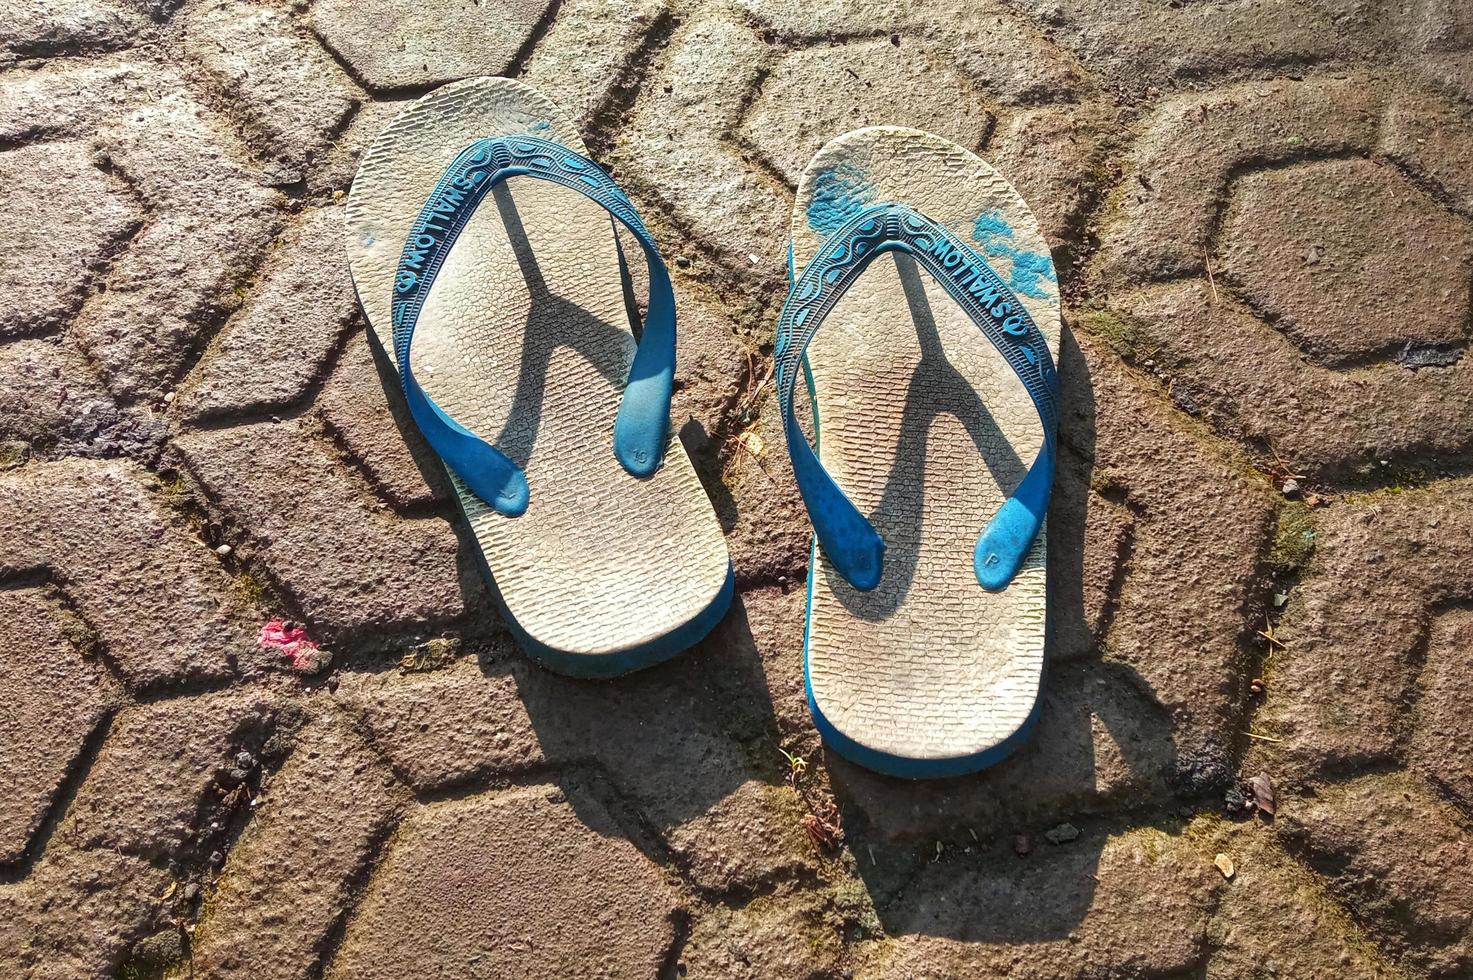 Cianjur Regency, West Java, Indonesia on March 16, 2022 Two pairs of flip-flops in the yard.  Photos to complement the article.